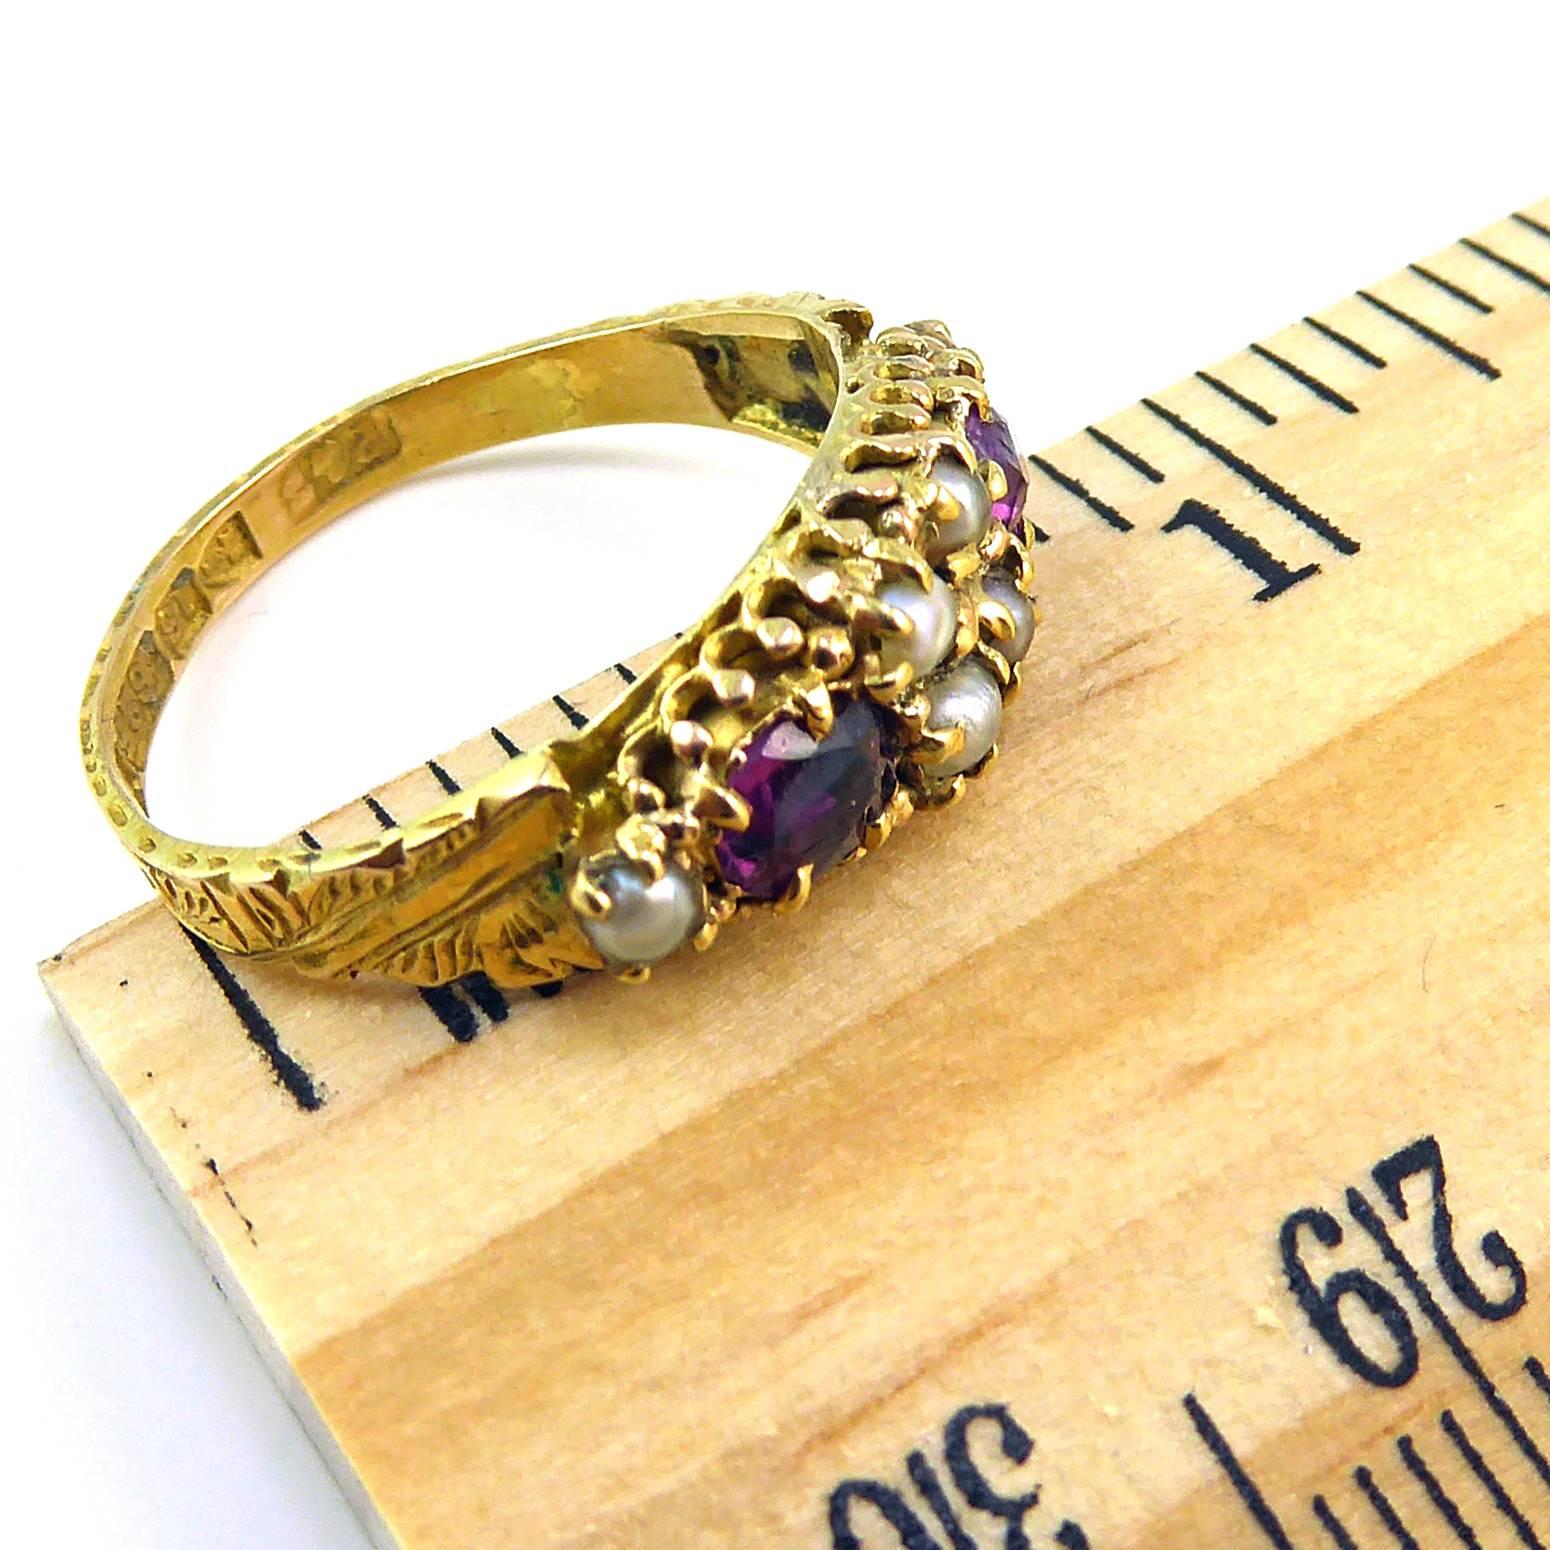 Victorian Antique Pearl and Paste Garnet Ring Chester Hallmark for 1888 15 Carat Gold